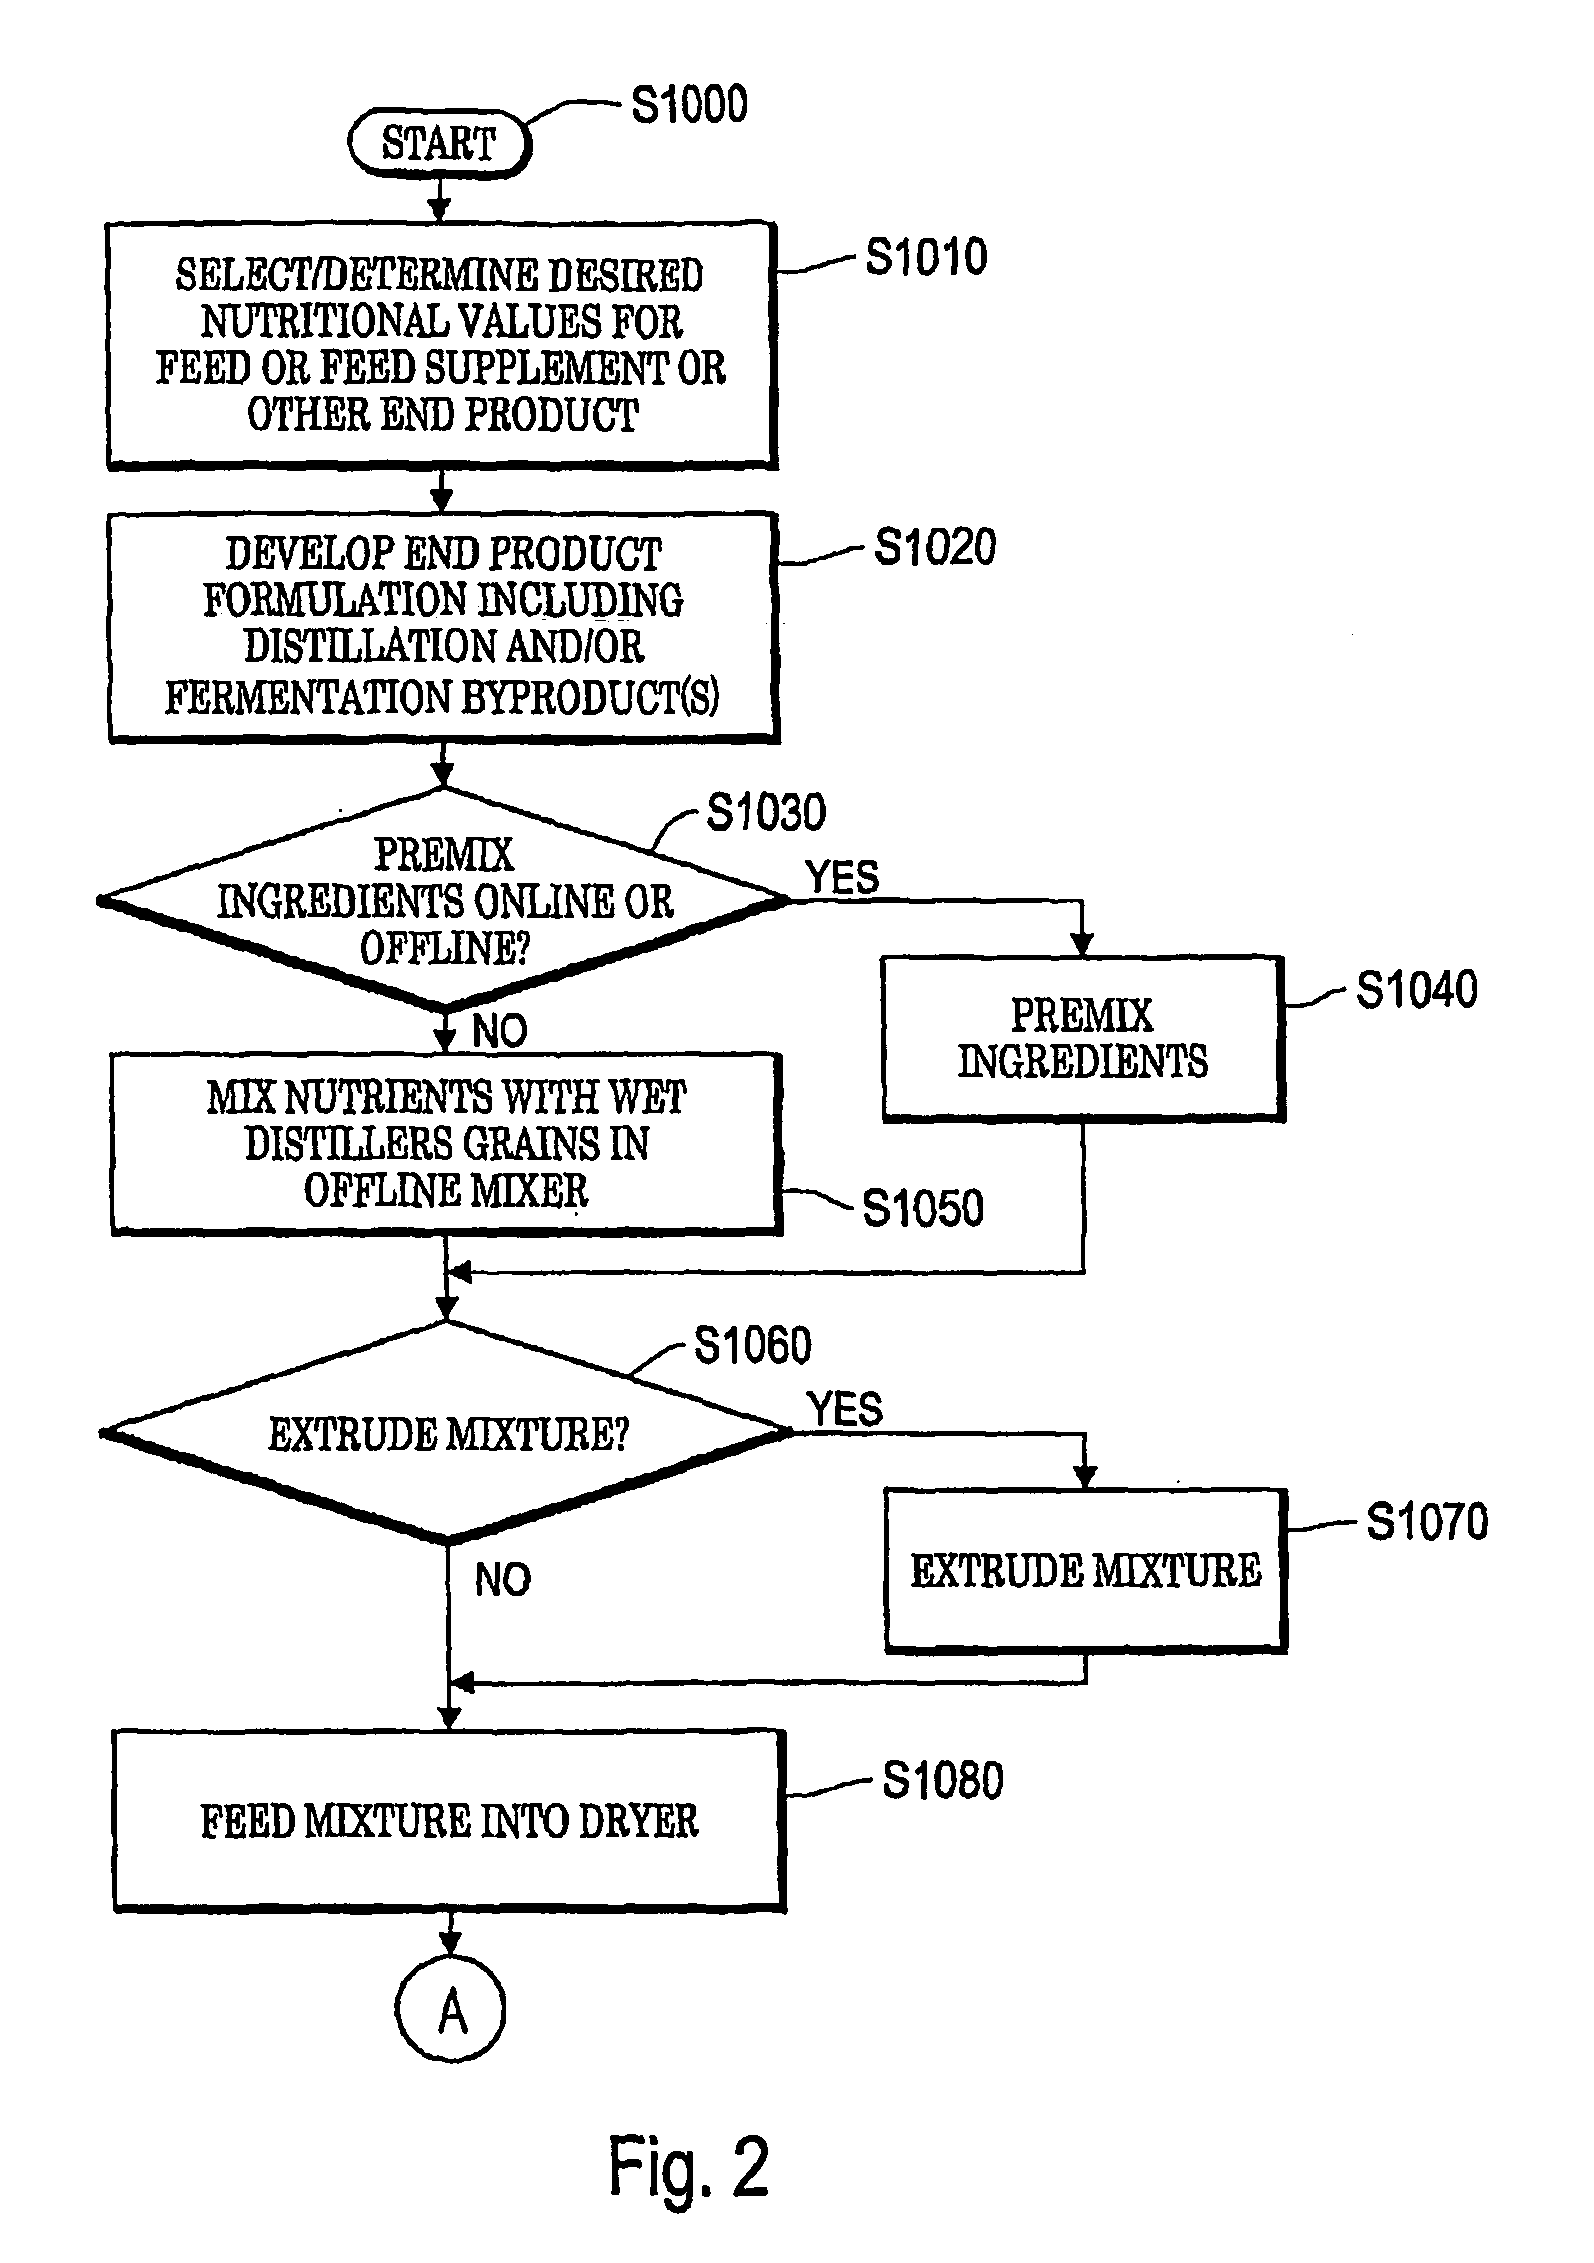 Fermentation byproduct feed formulation and processing